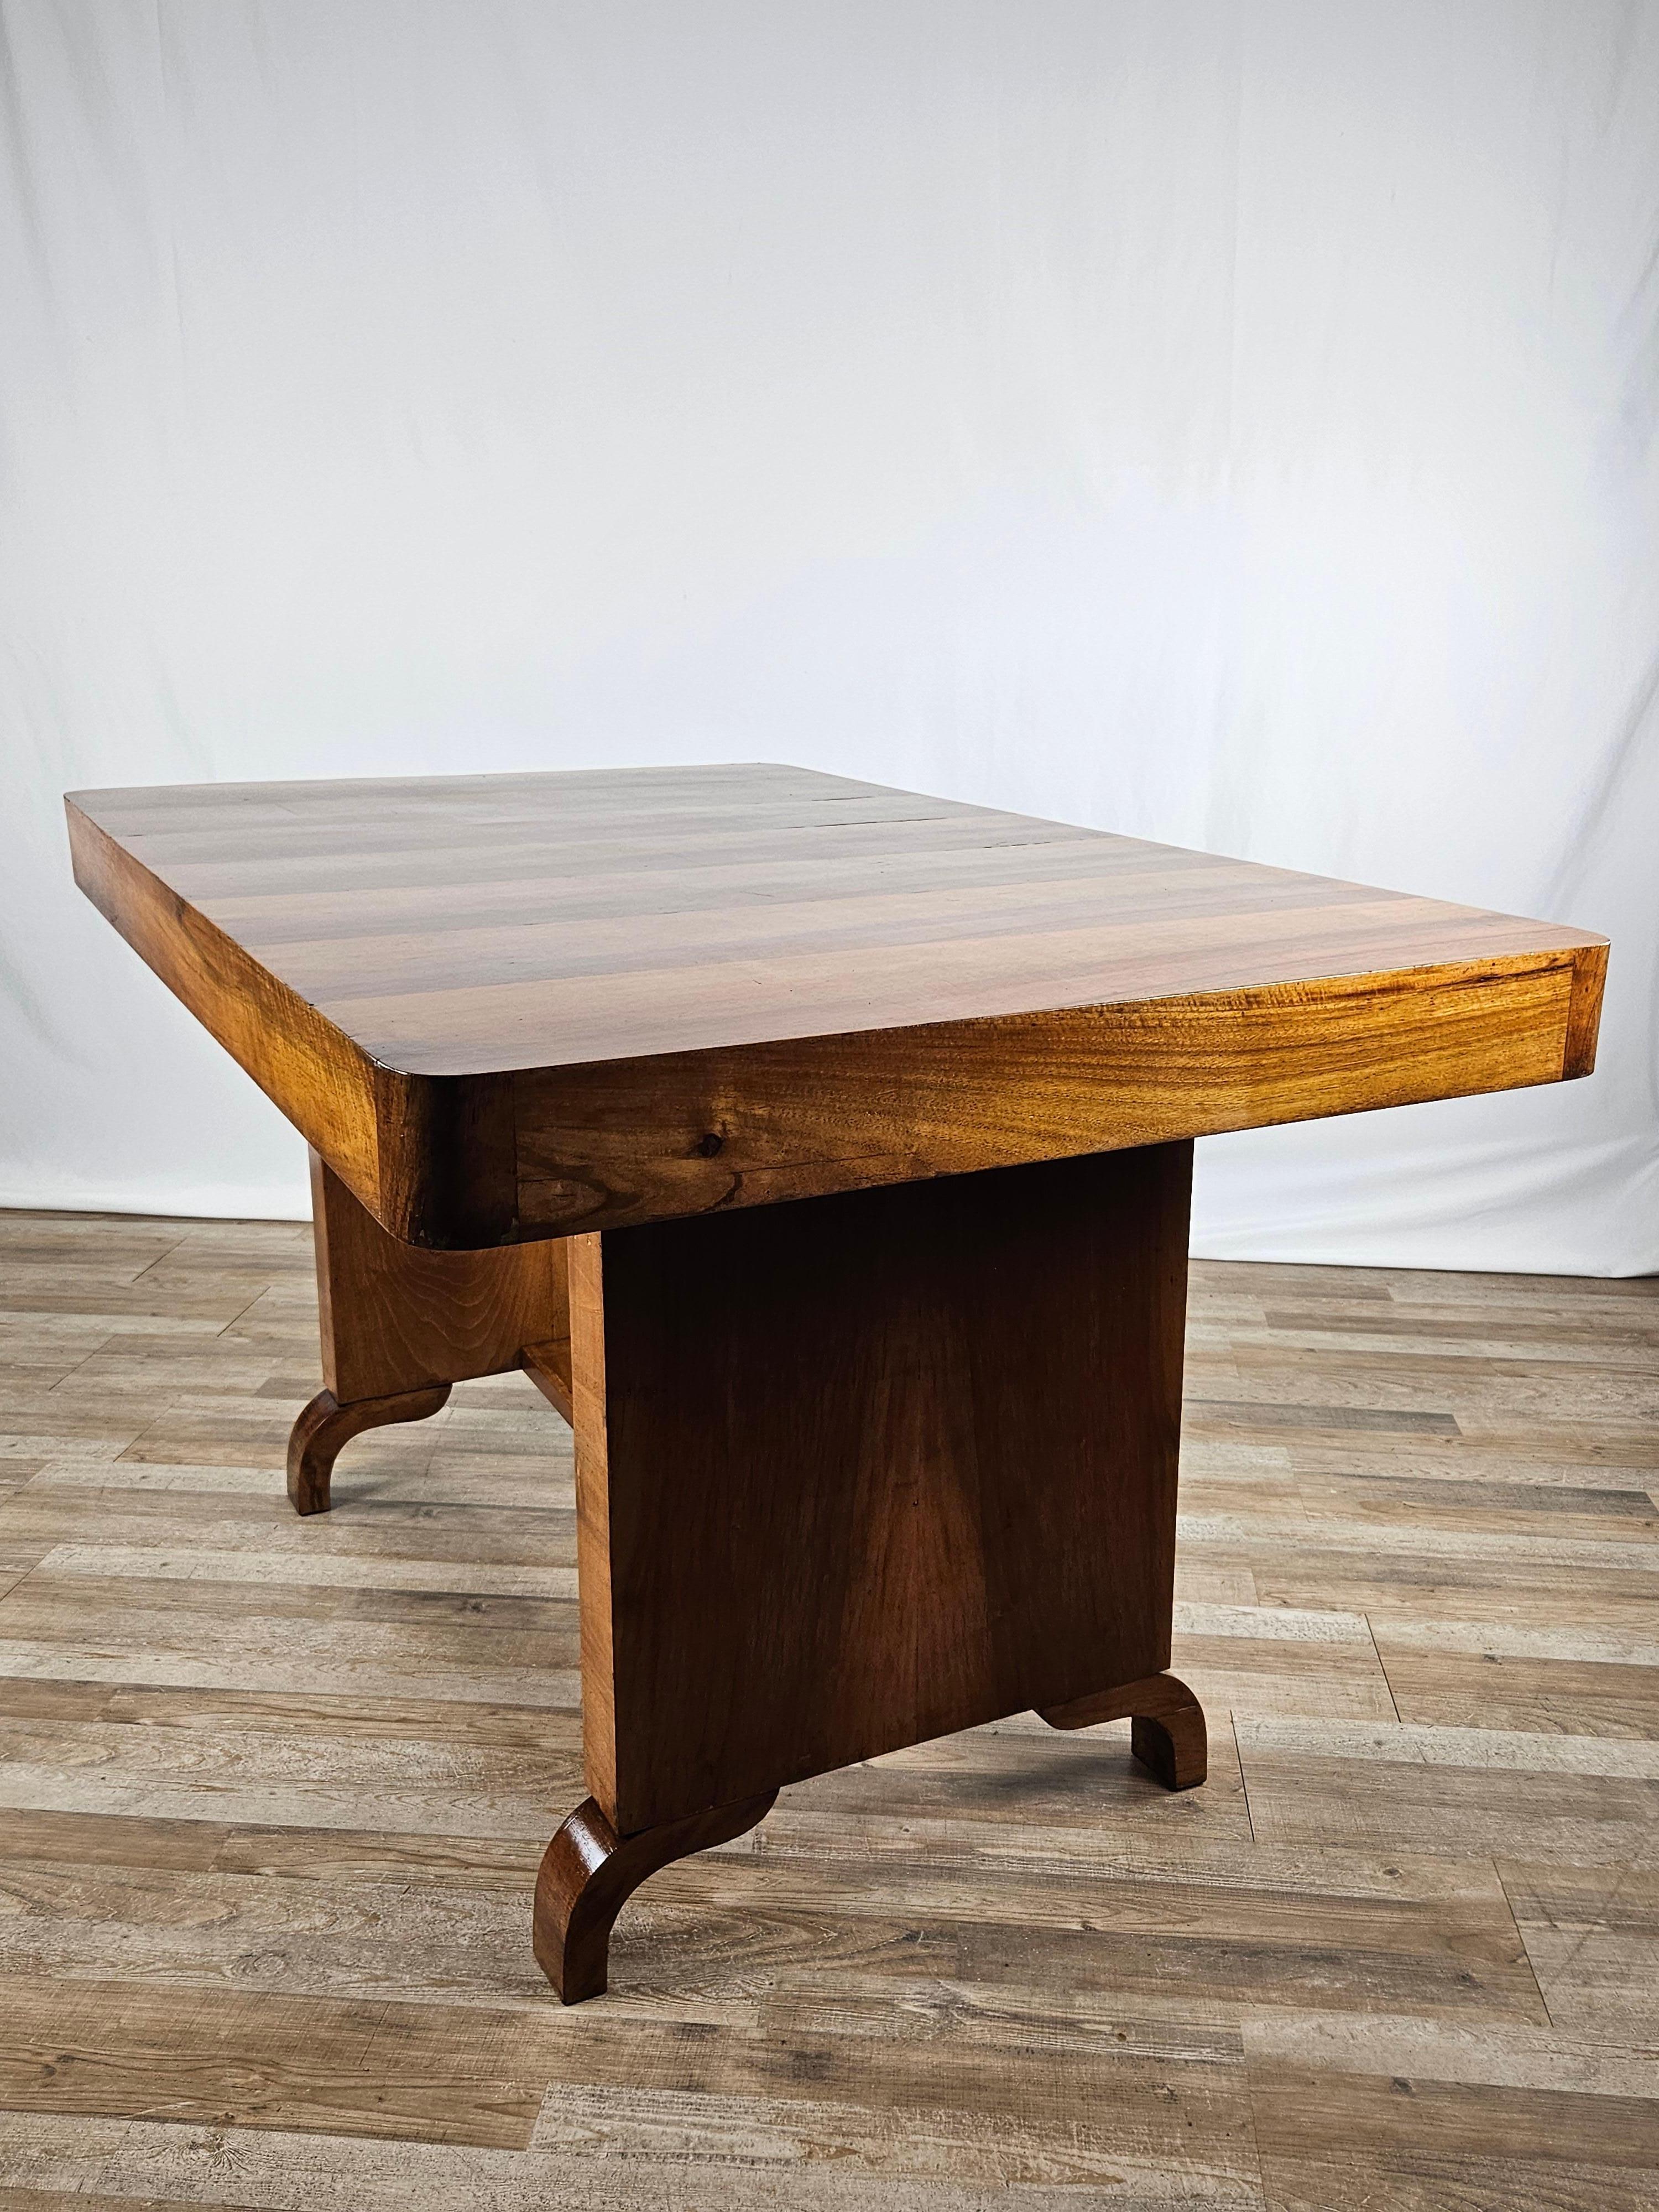 Elegant and refined 1930s Art Deco style table, made entirely of briarwood with a comfortable top to seat 4 to 6 people.

The table features a linear and modern design, suitable for any kind of environment from antique to vintage.

Oil and shellac